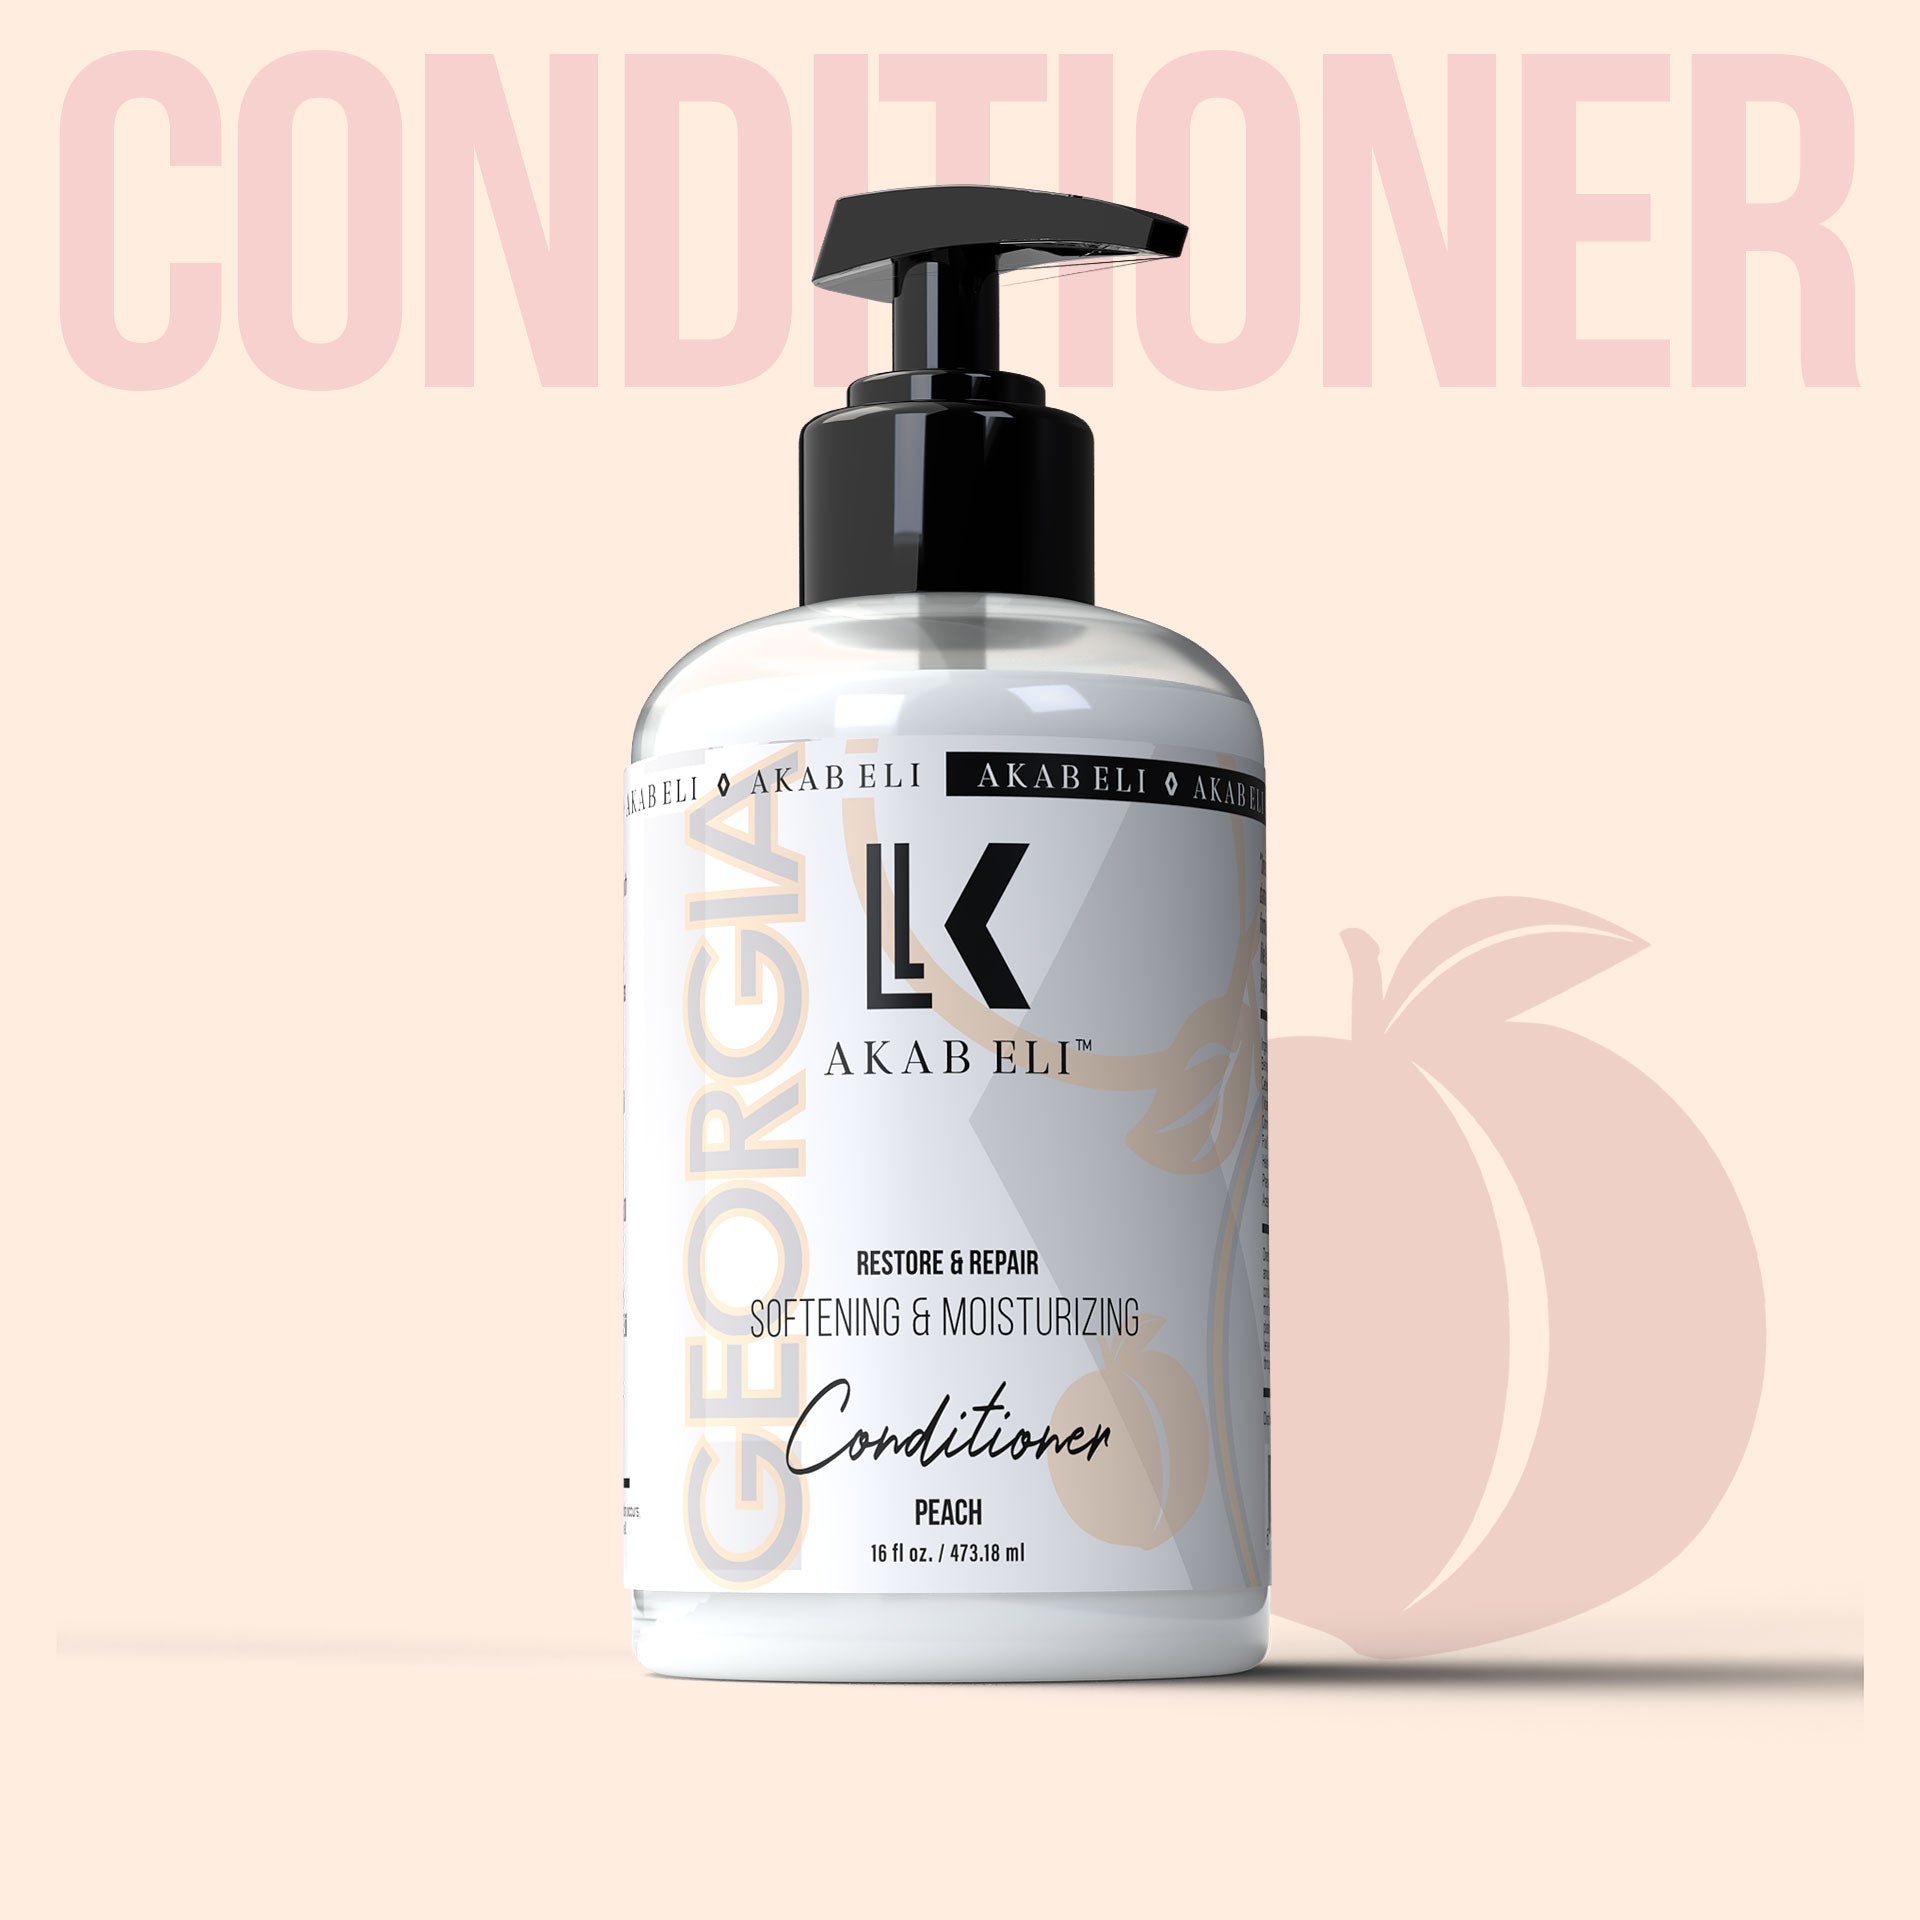 Akab Eli Georgia Hair Conditioner - A Softening & Moisturizing Wash Full of Natural Ingredients Peach Scented